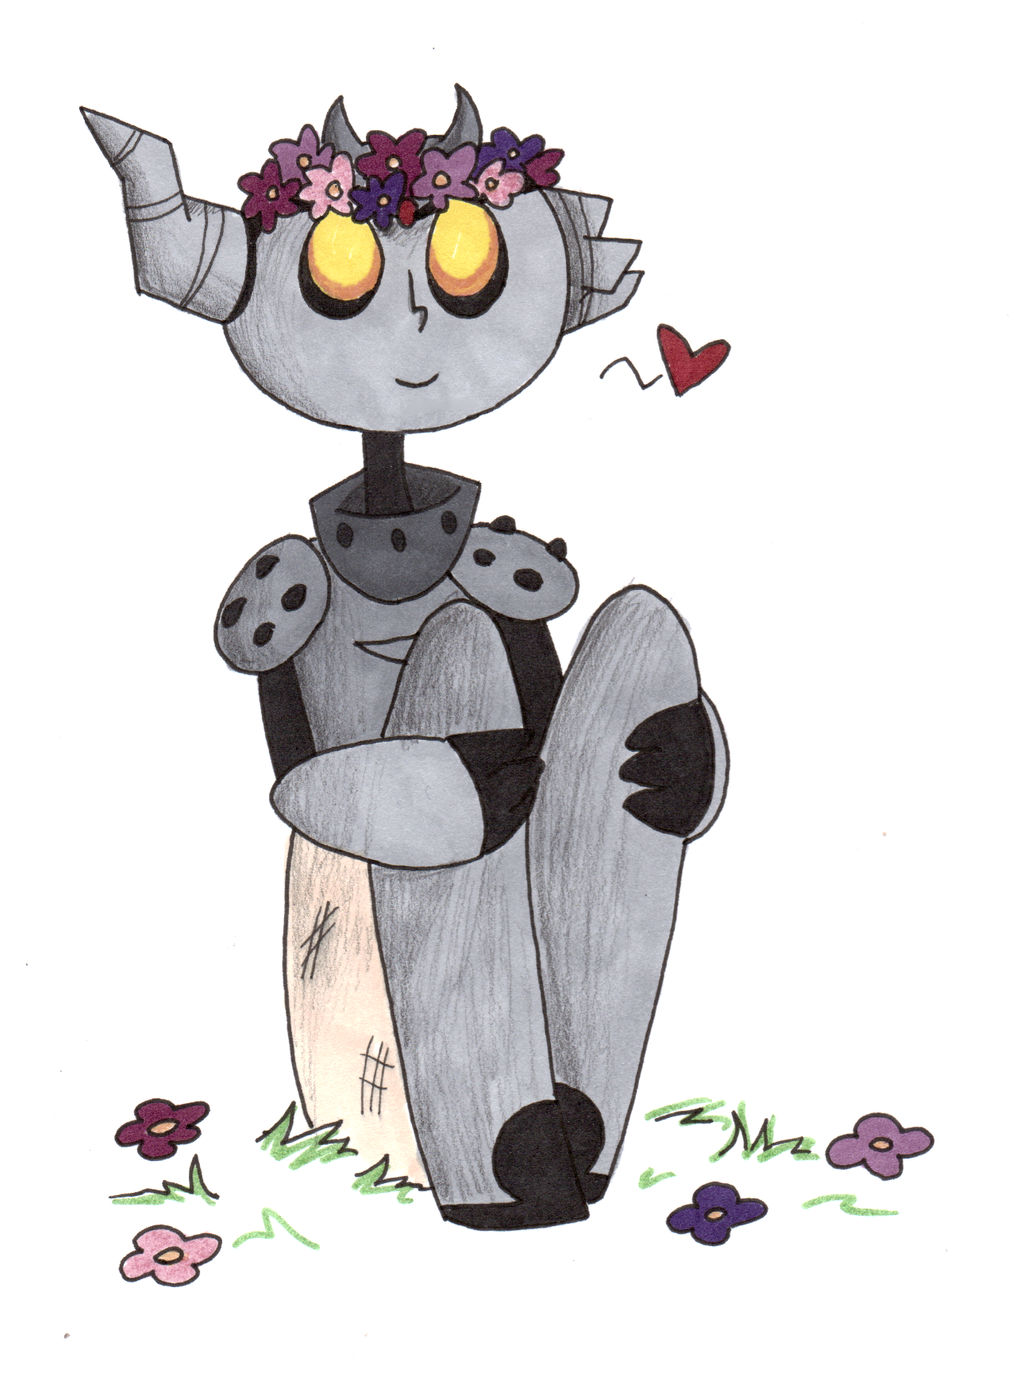 robots like flower crowns too